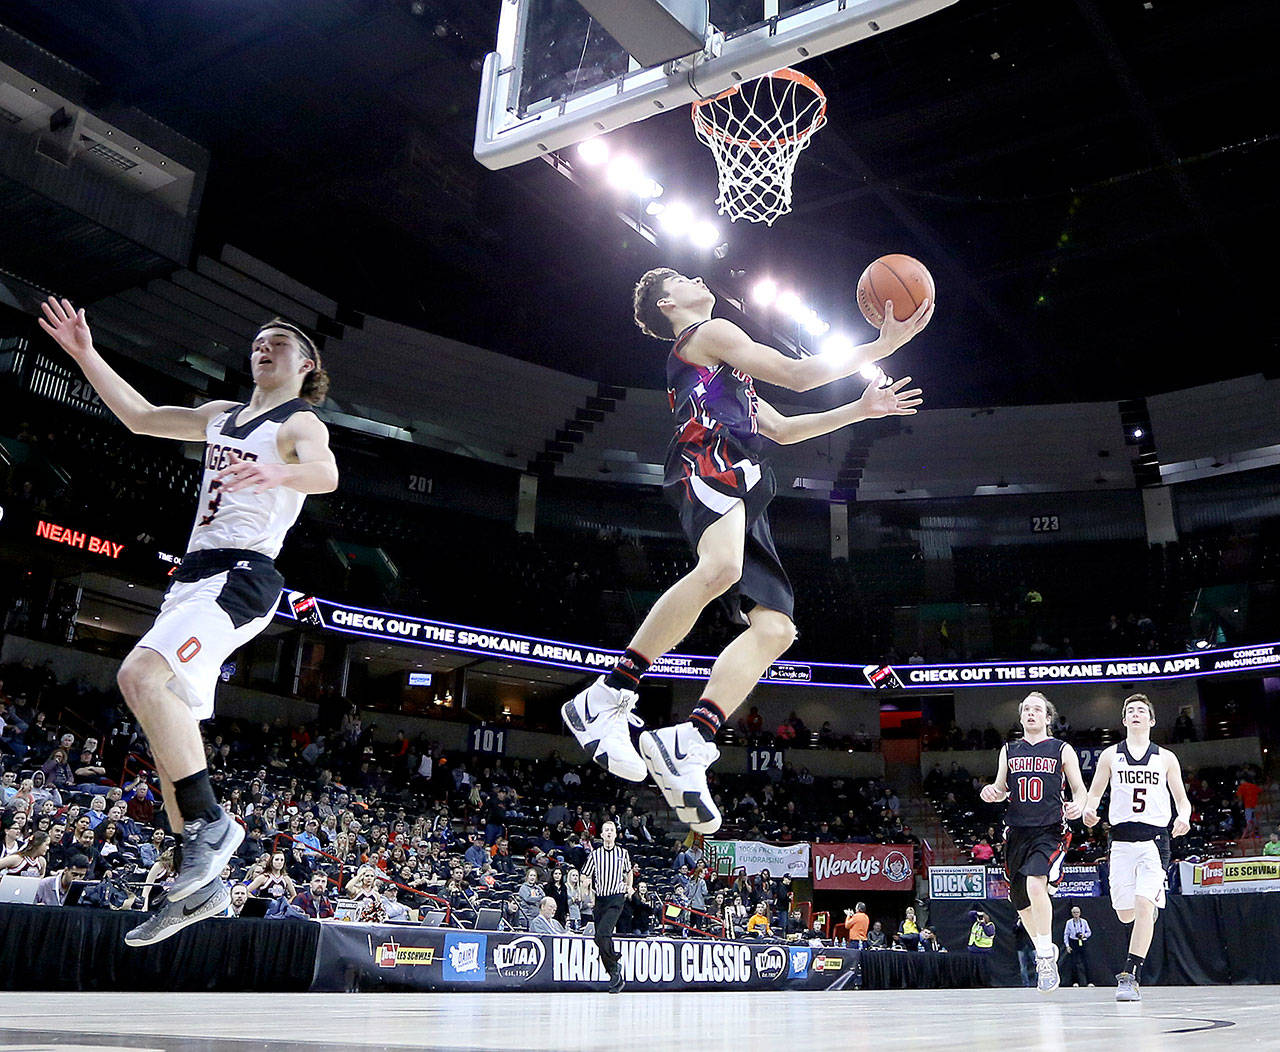 Neah Bay’s Jay Brunk goes up for a layup against Odessa at the state 1B basketball tournament Wednesday night. The Red Devils gave the No. 2-ranked team in the state a run for its money in a 81-73 loss. (Chris Johnson/for Peninsula Daily News)